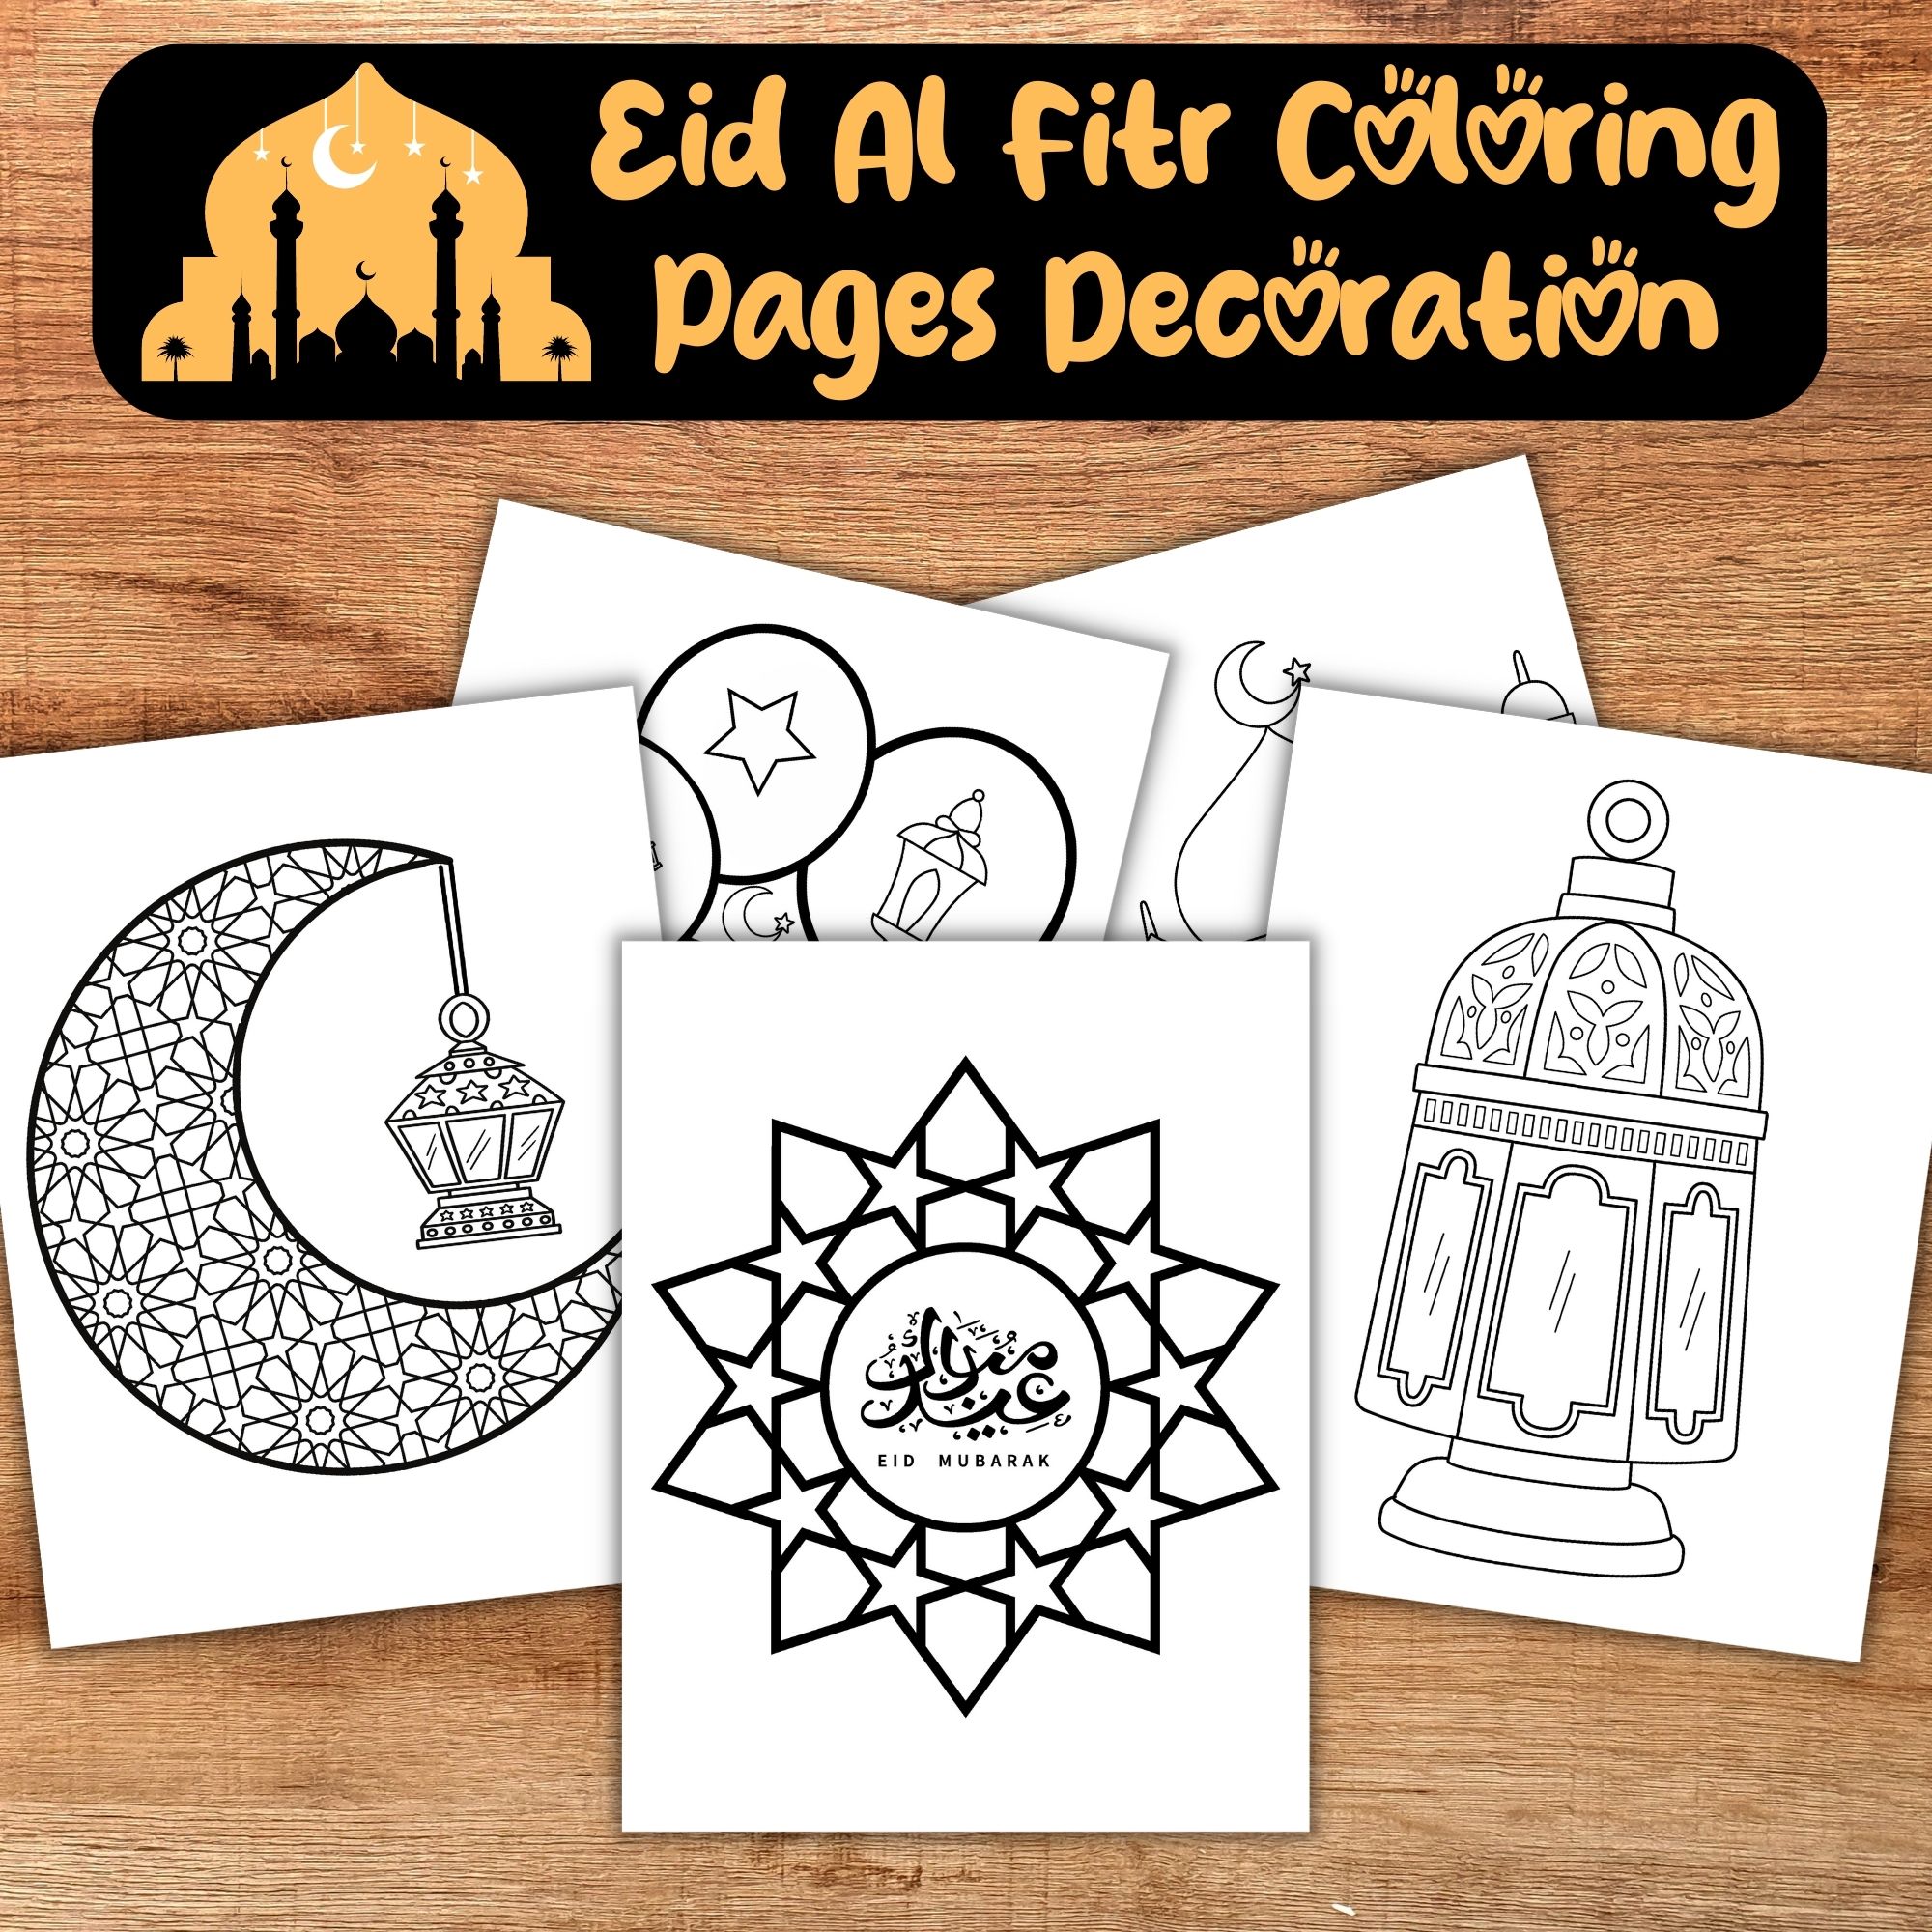 Eid al fitr coloring pages decoration eid al fitr decoration made by teachers